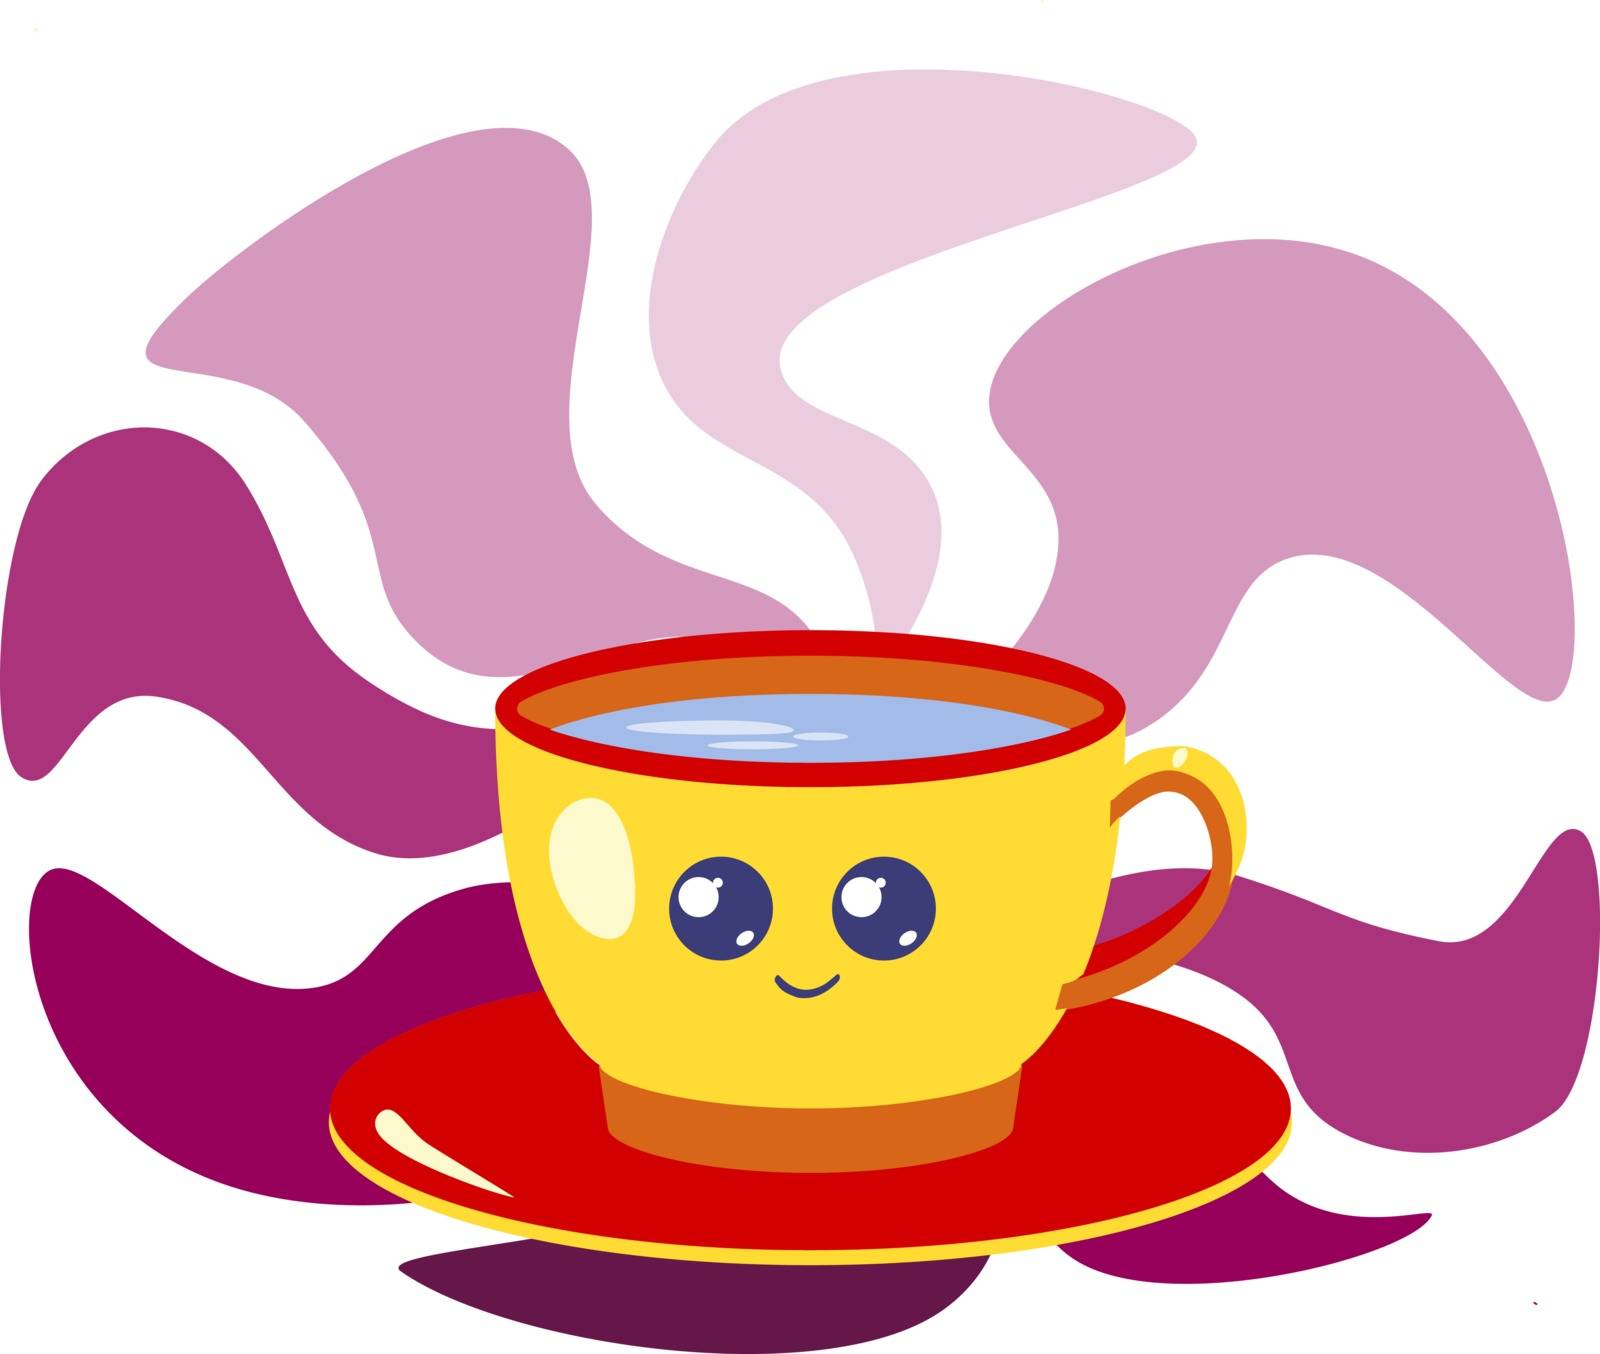 Cute little cup, illustration, vector on white background.